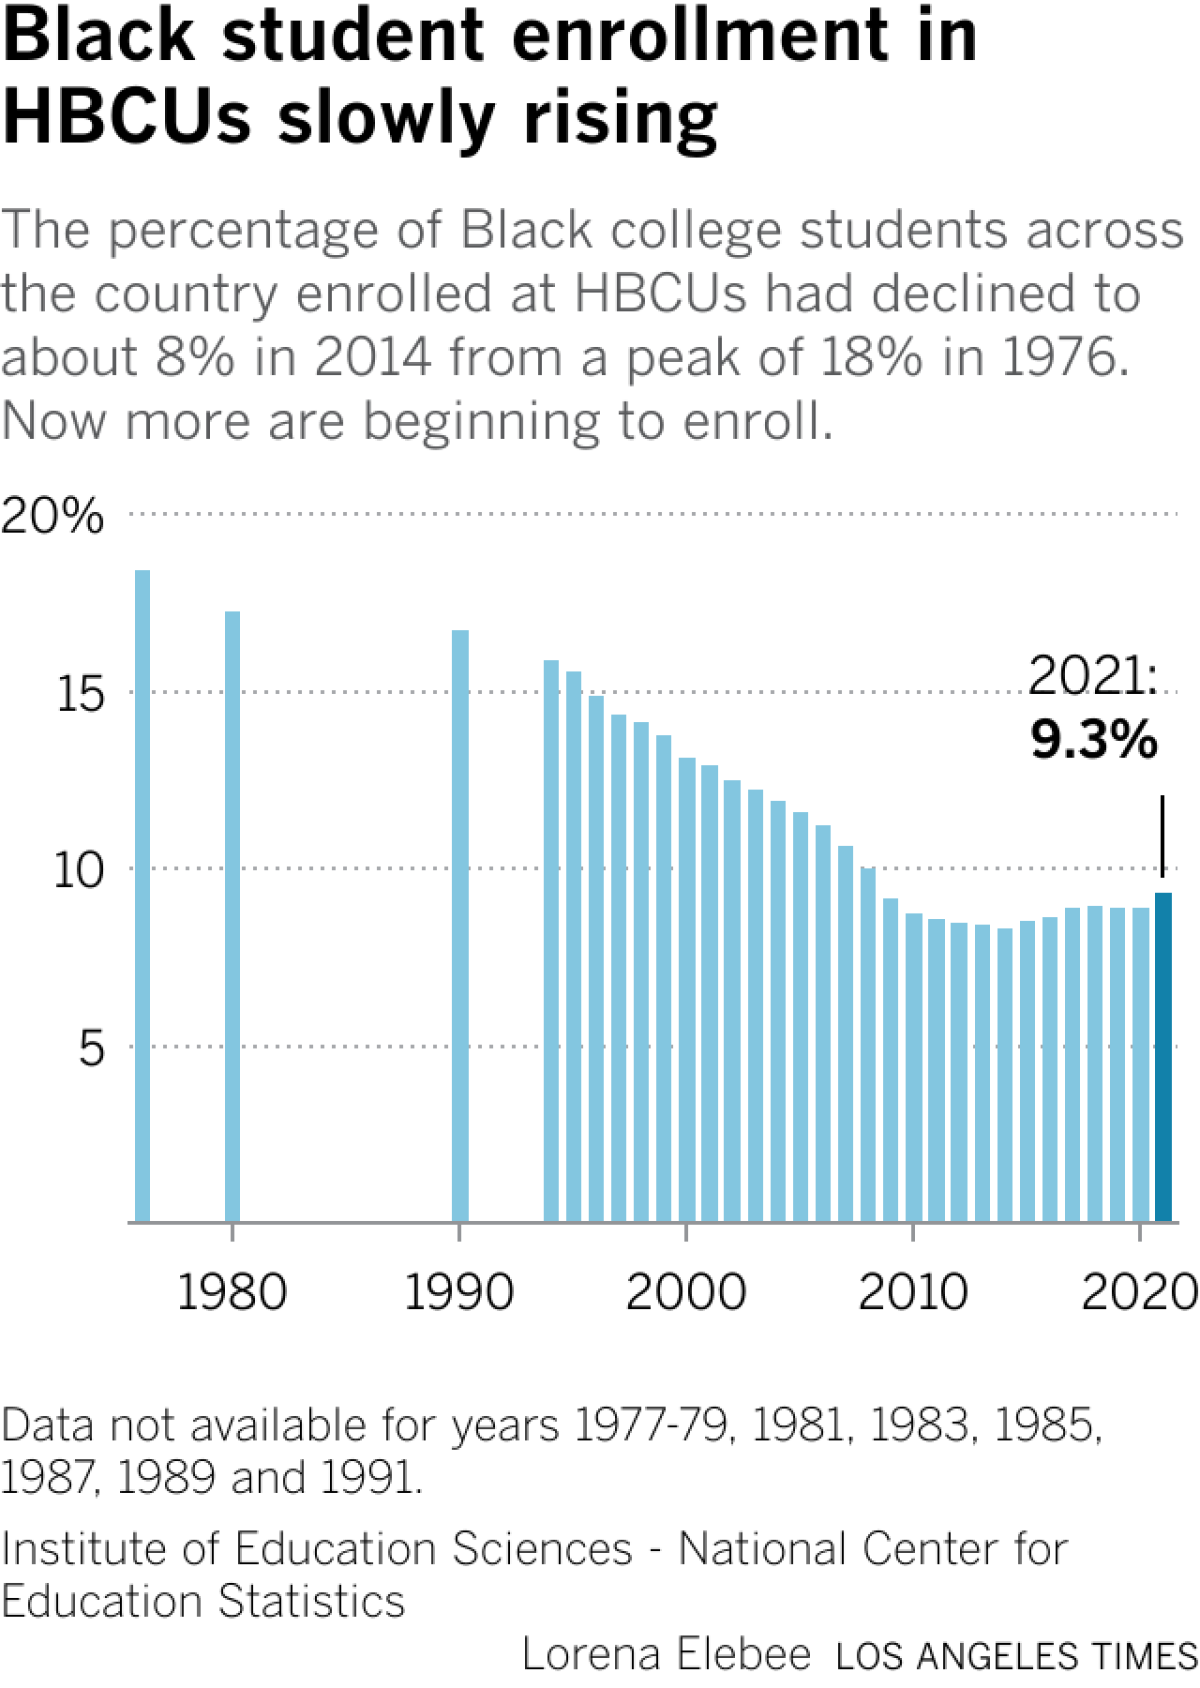 A chart showing the decline and recent rise in the share of Black students enrolling at HBCUs from 1976 through 2021.